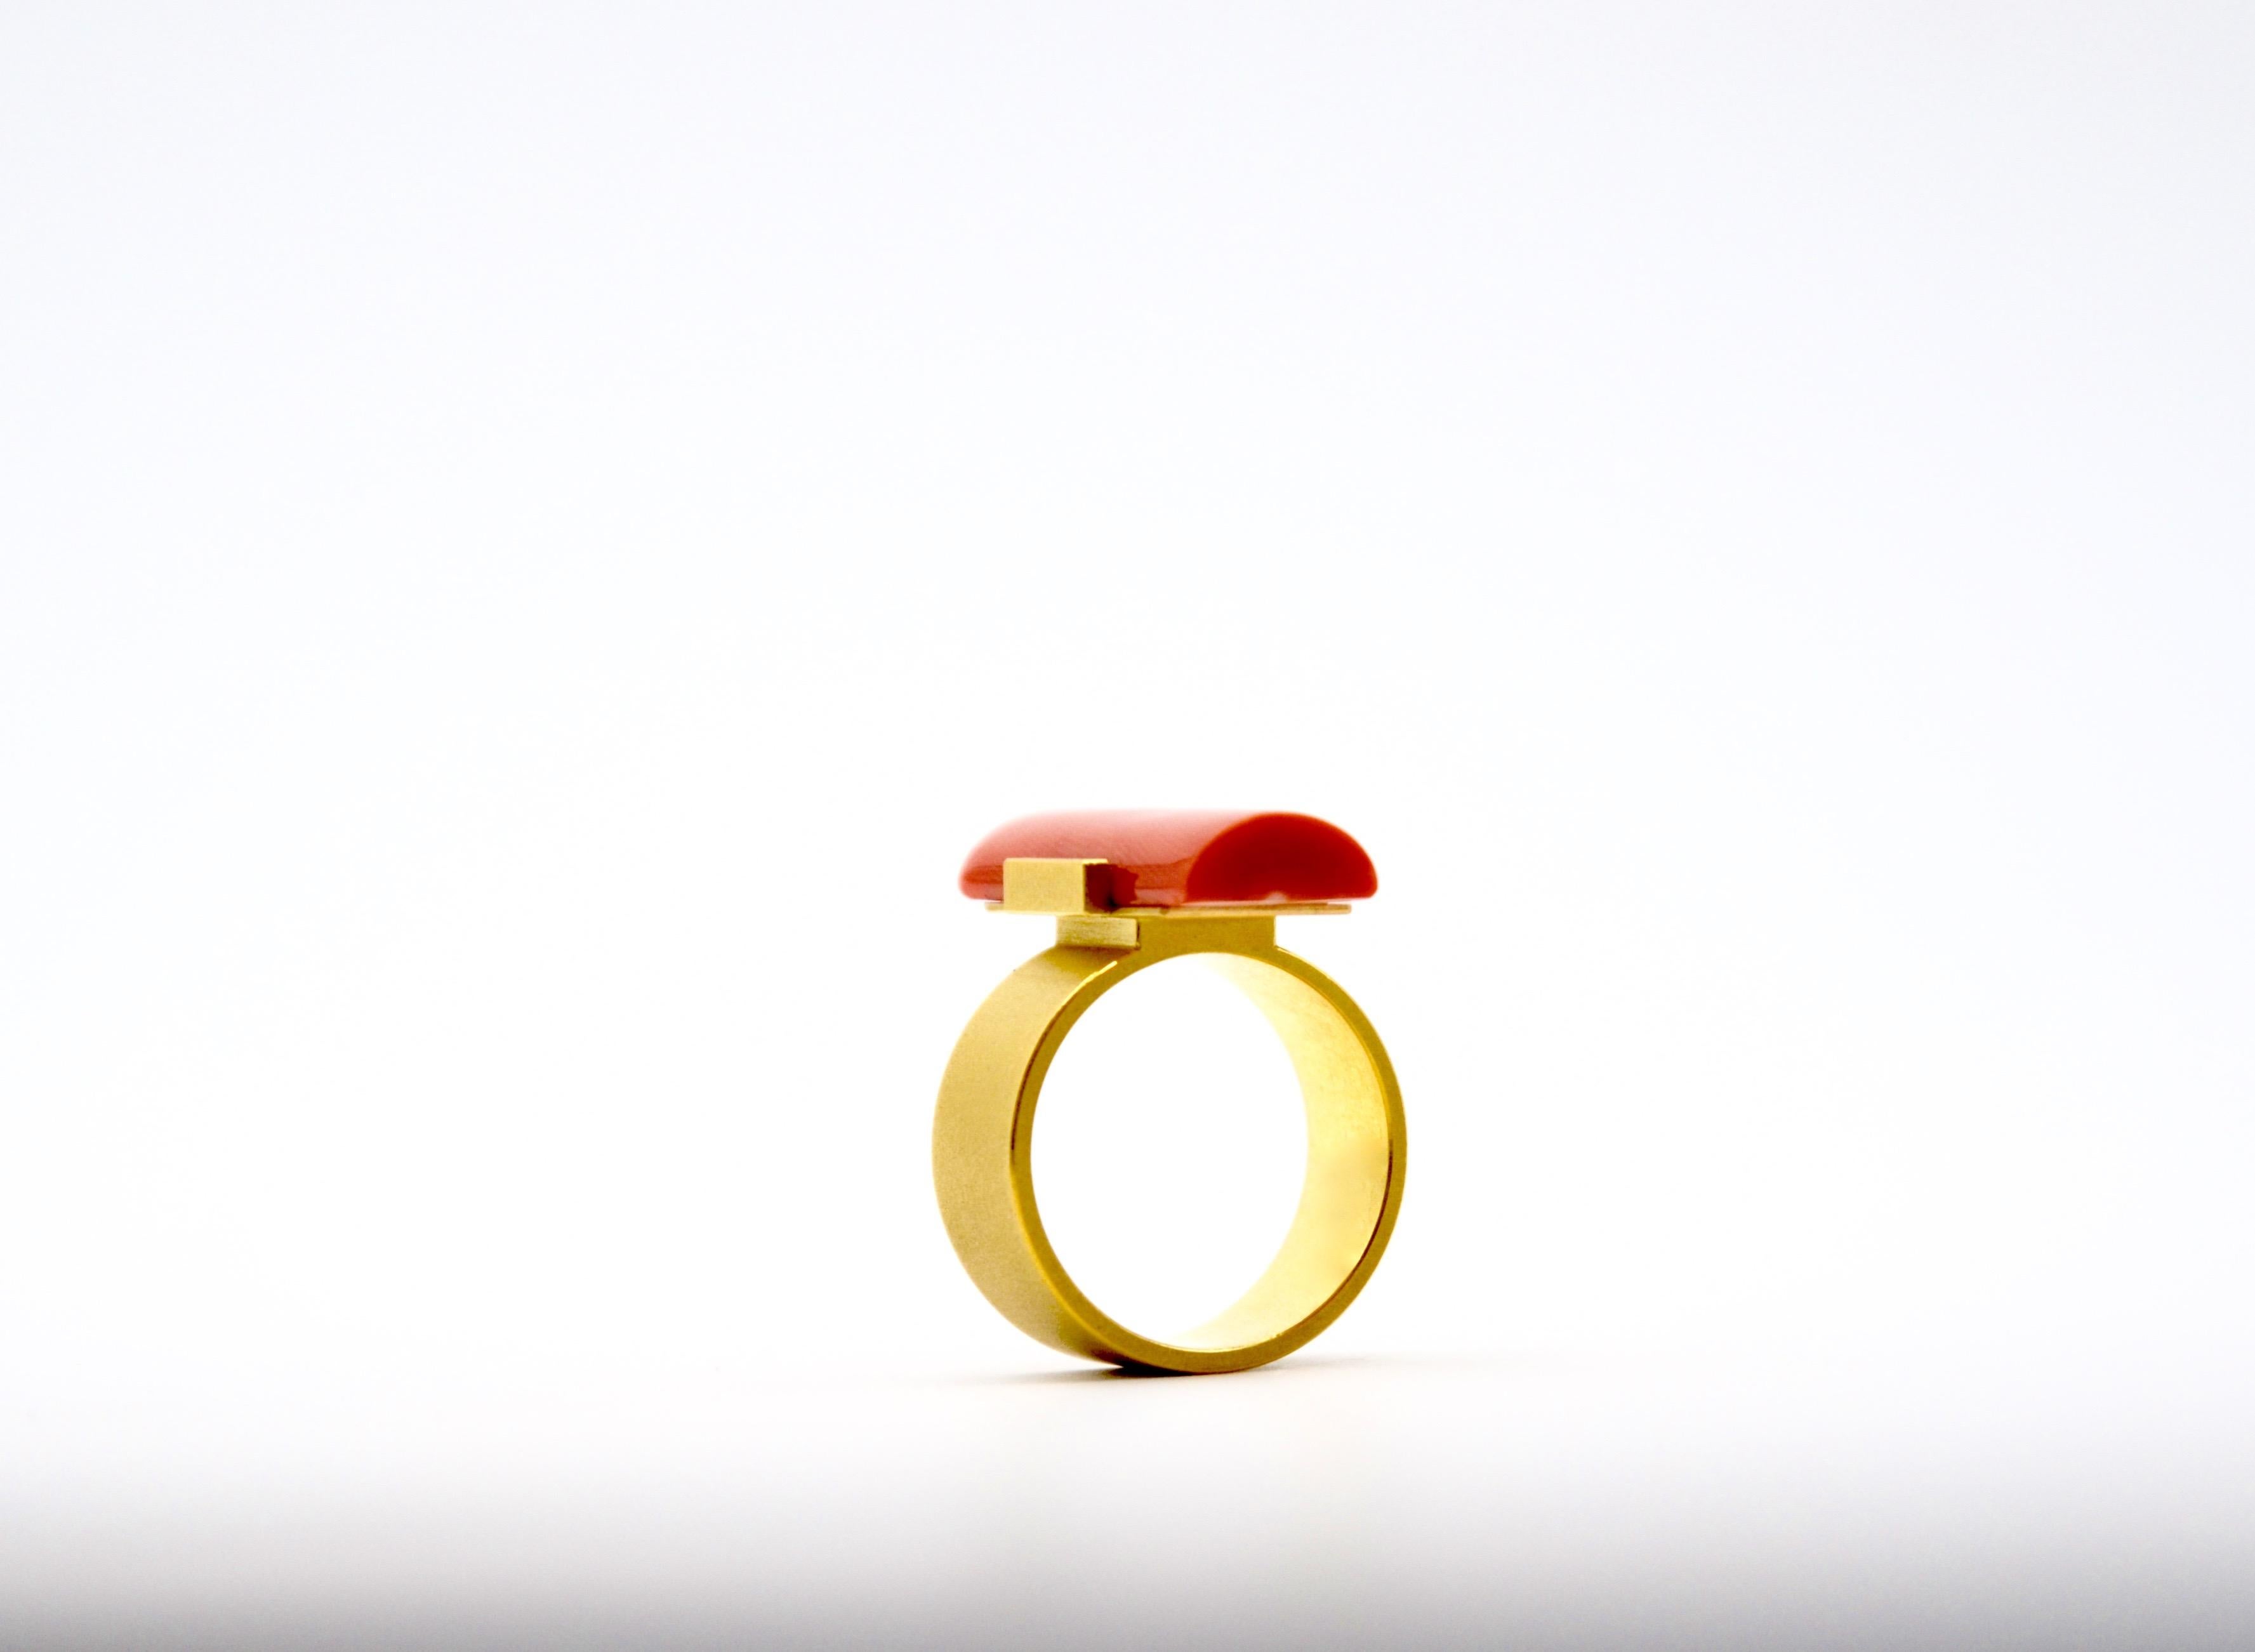 Contemporary 18 Karat Yellow Gold Coral Cocktail Ring

Minimalist, modern, elegant - handcrafted in our atelier, designed by Arno Schneider.

Fine jewelry, high quality, delicate materials, unique design, a melange of art genres. Through Arno